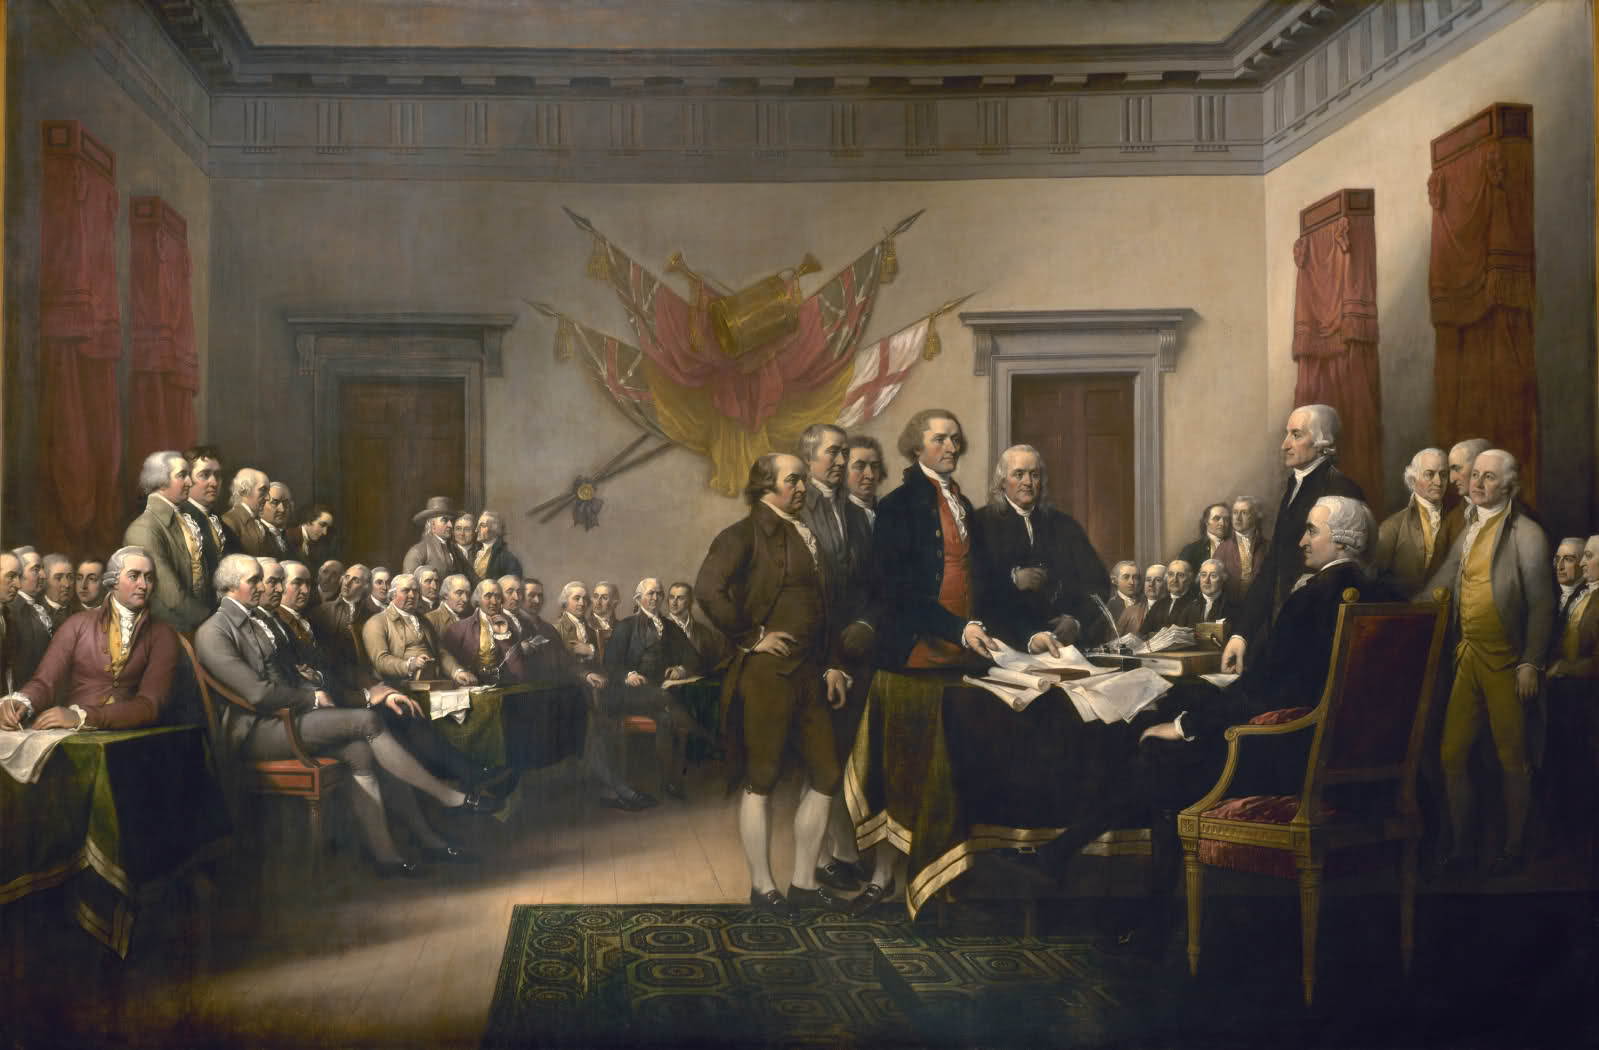 The U.S Declaration of Independence was not signed on July 4, 1776. It was approved by Congress on that date and signed on August 2, 1776. More info on <a href="http://www.archives.gov/exhibits/charters/declaration_history.html" target="_blank">Archives.gov</a>.